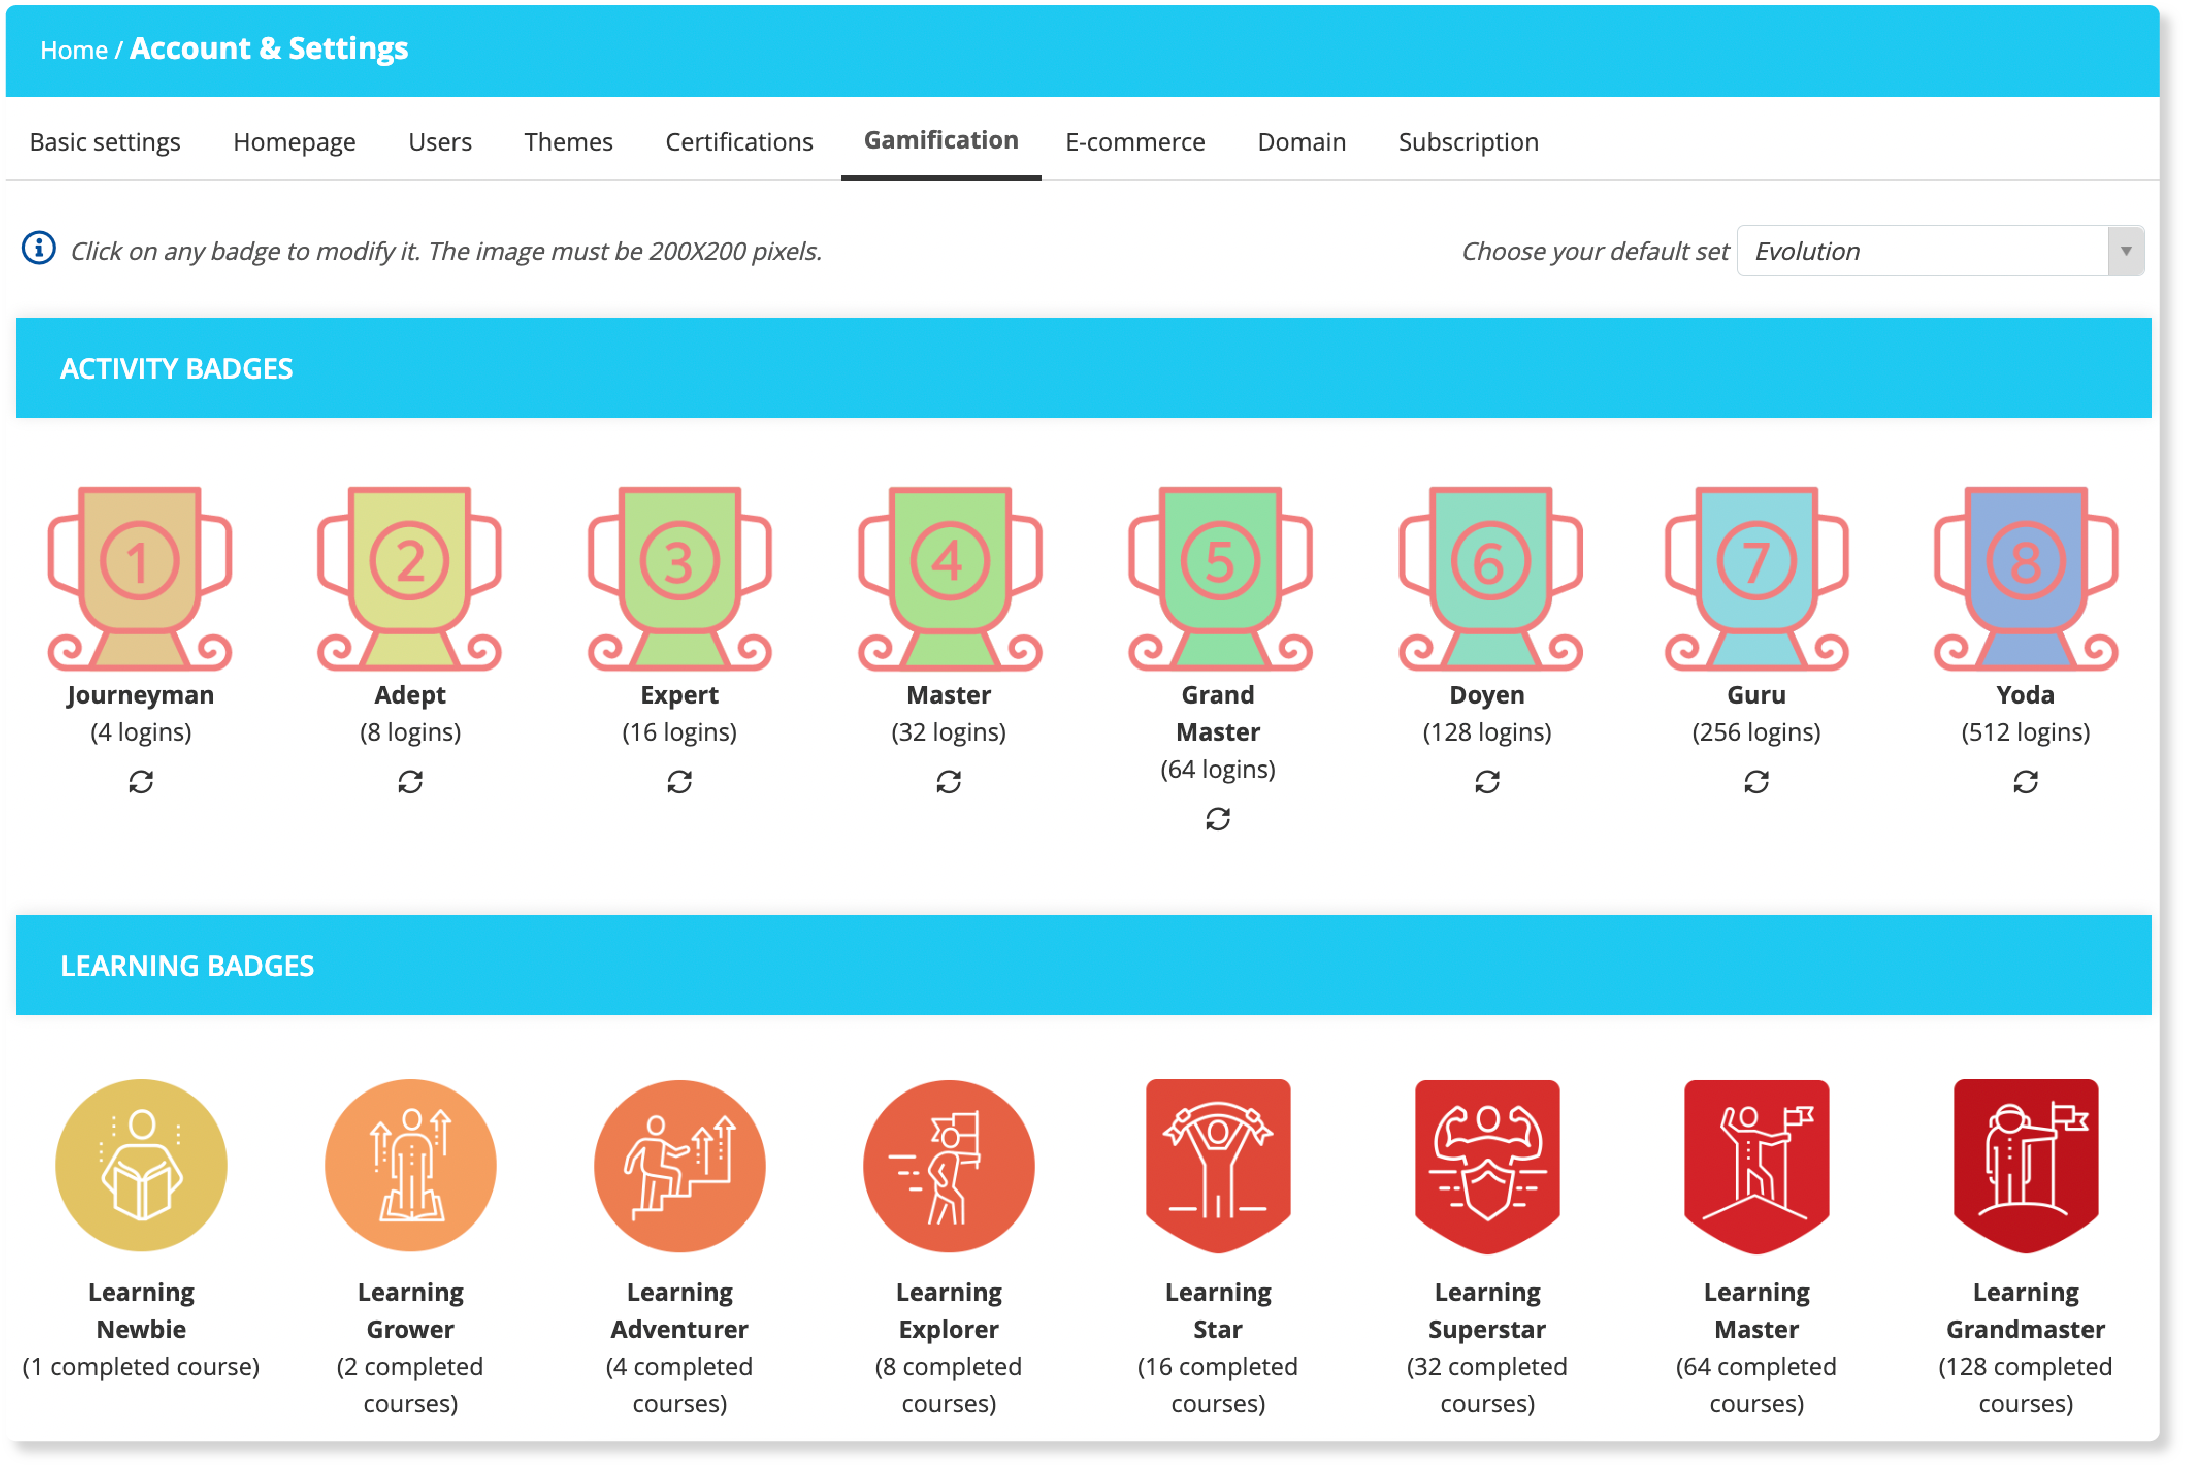 Customize Badges - TalentLMS' Gamification Engine